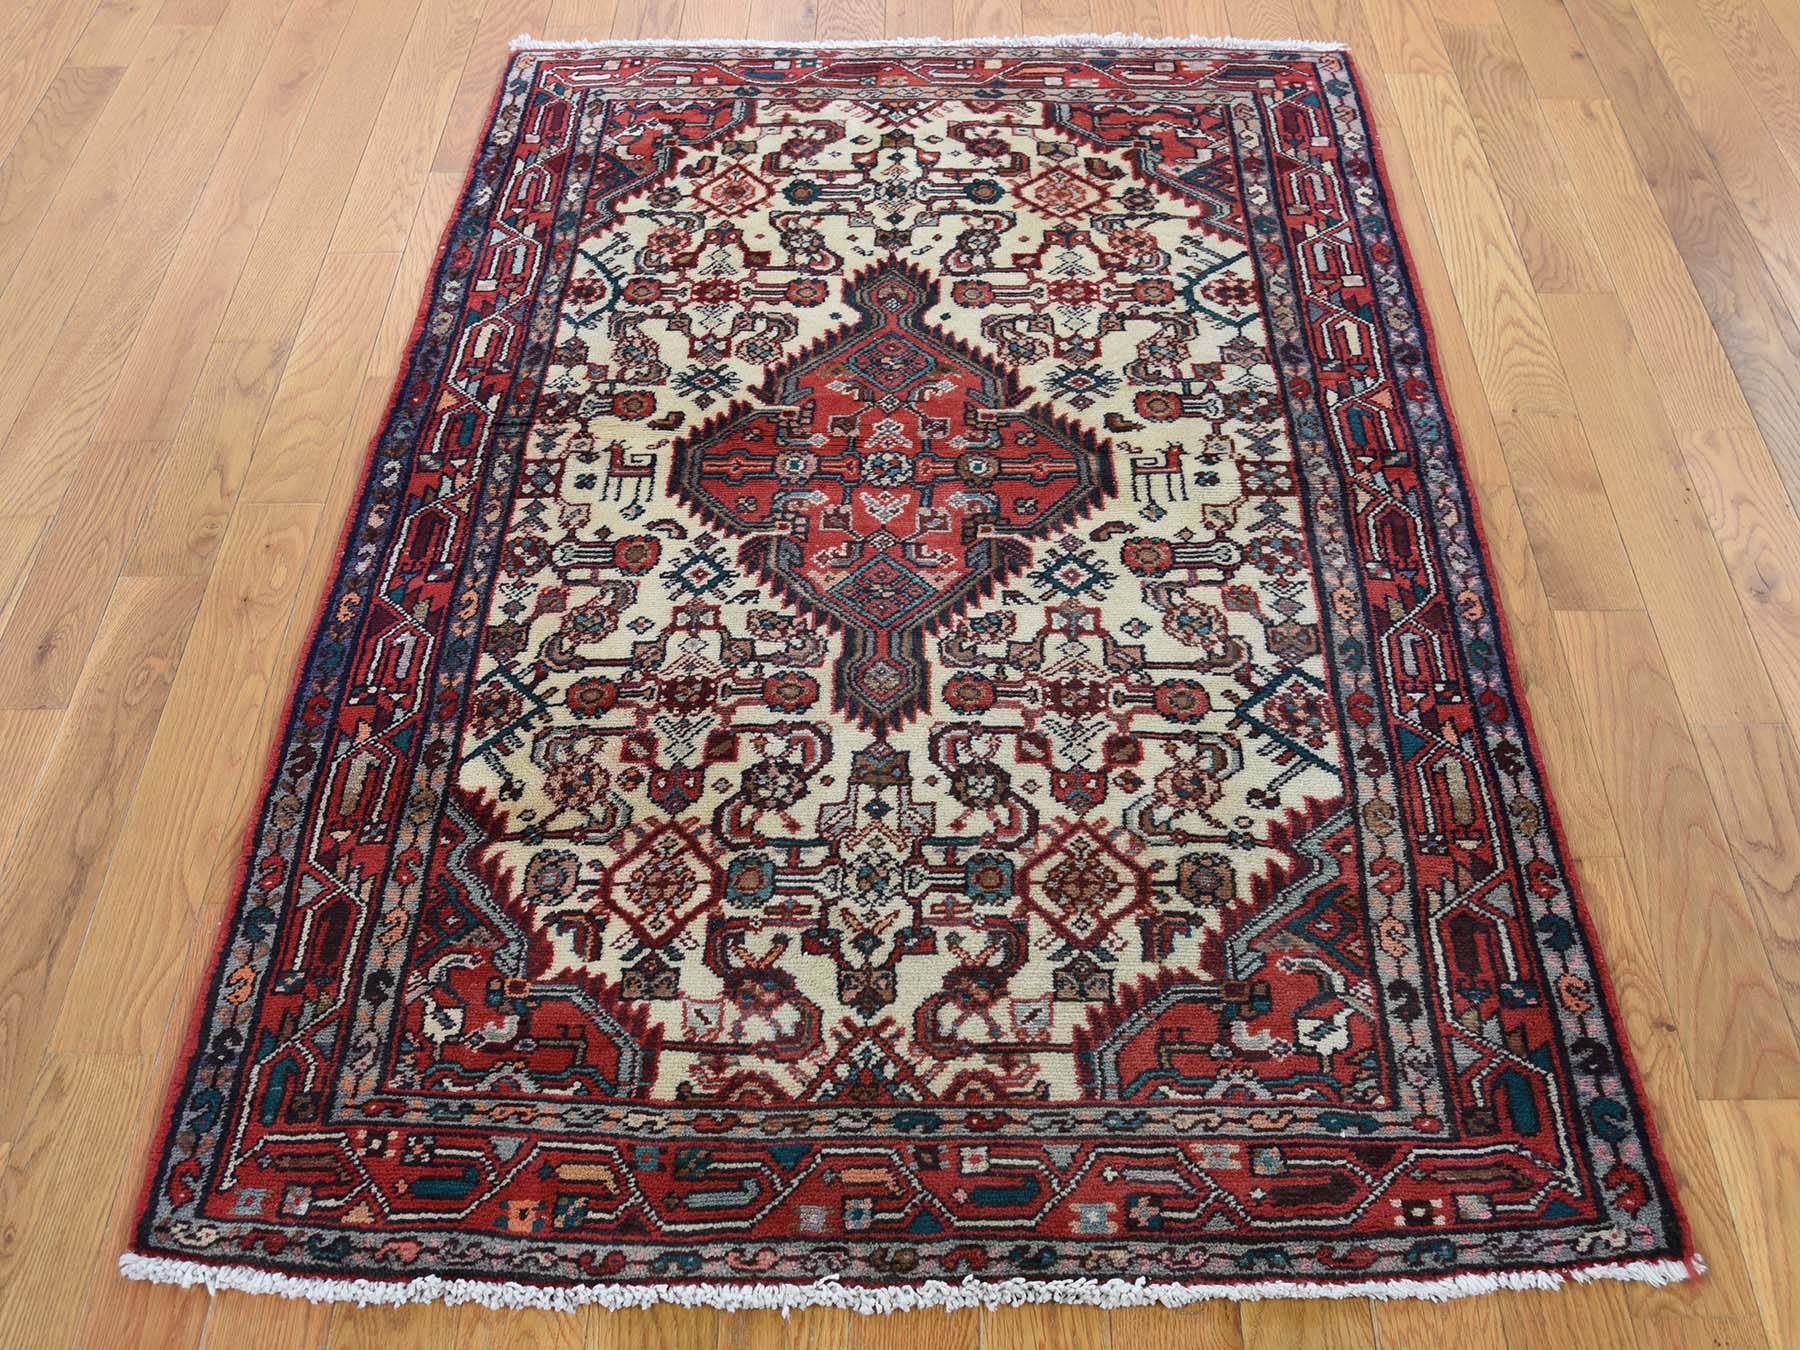 3'4"X5' Pure Wool Semi Antique Persian Hamadan Mint Condition Hand-Knotted Oriental Rug moadba66